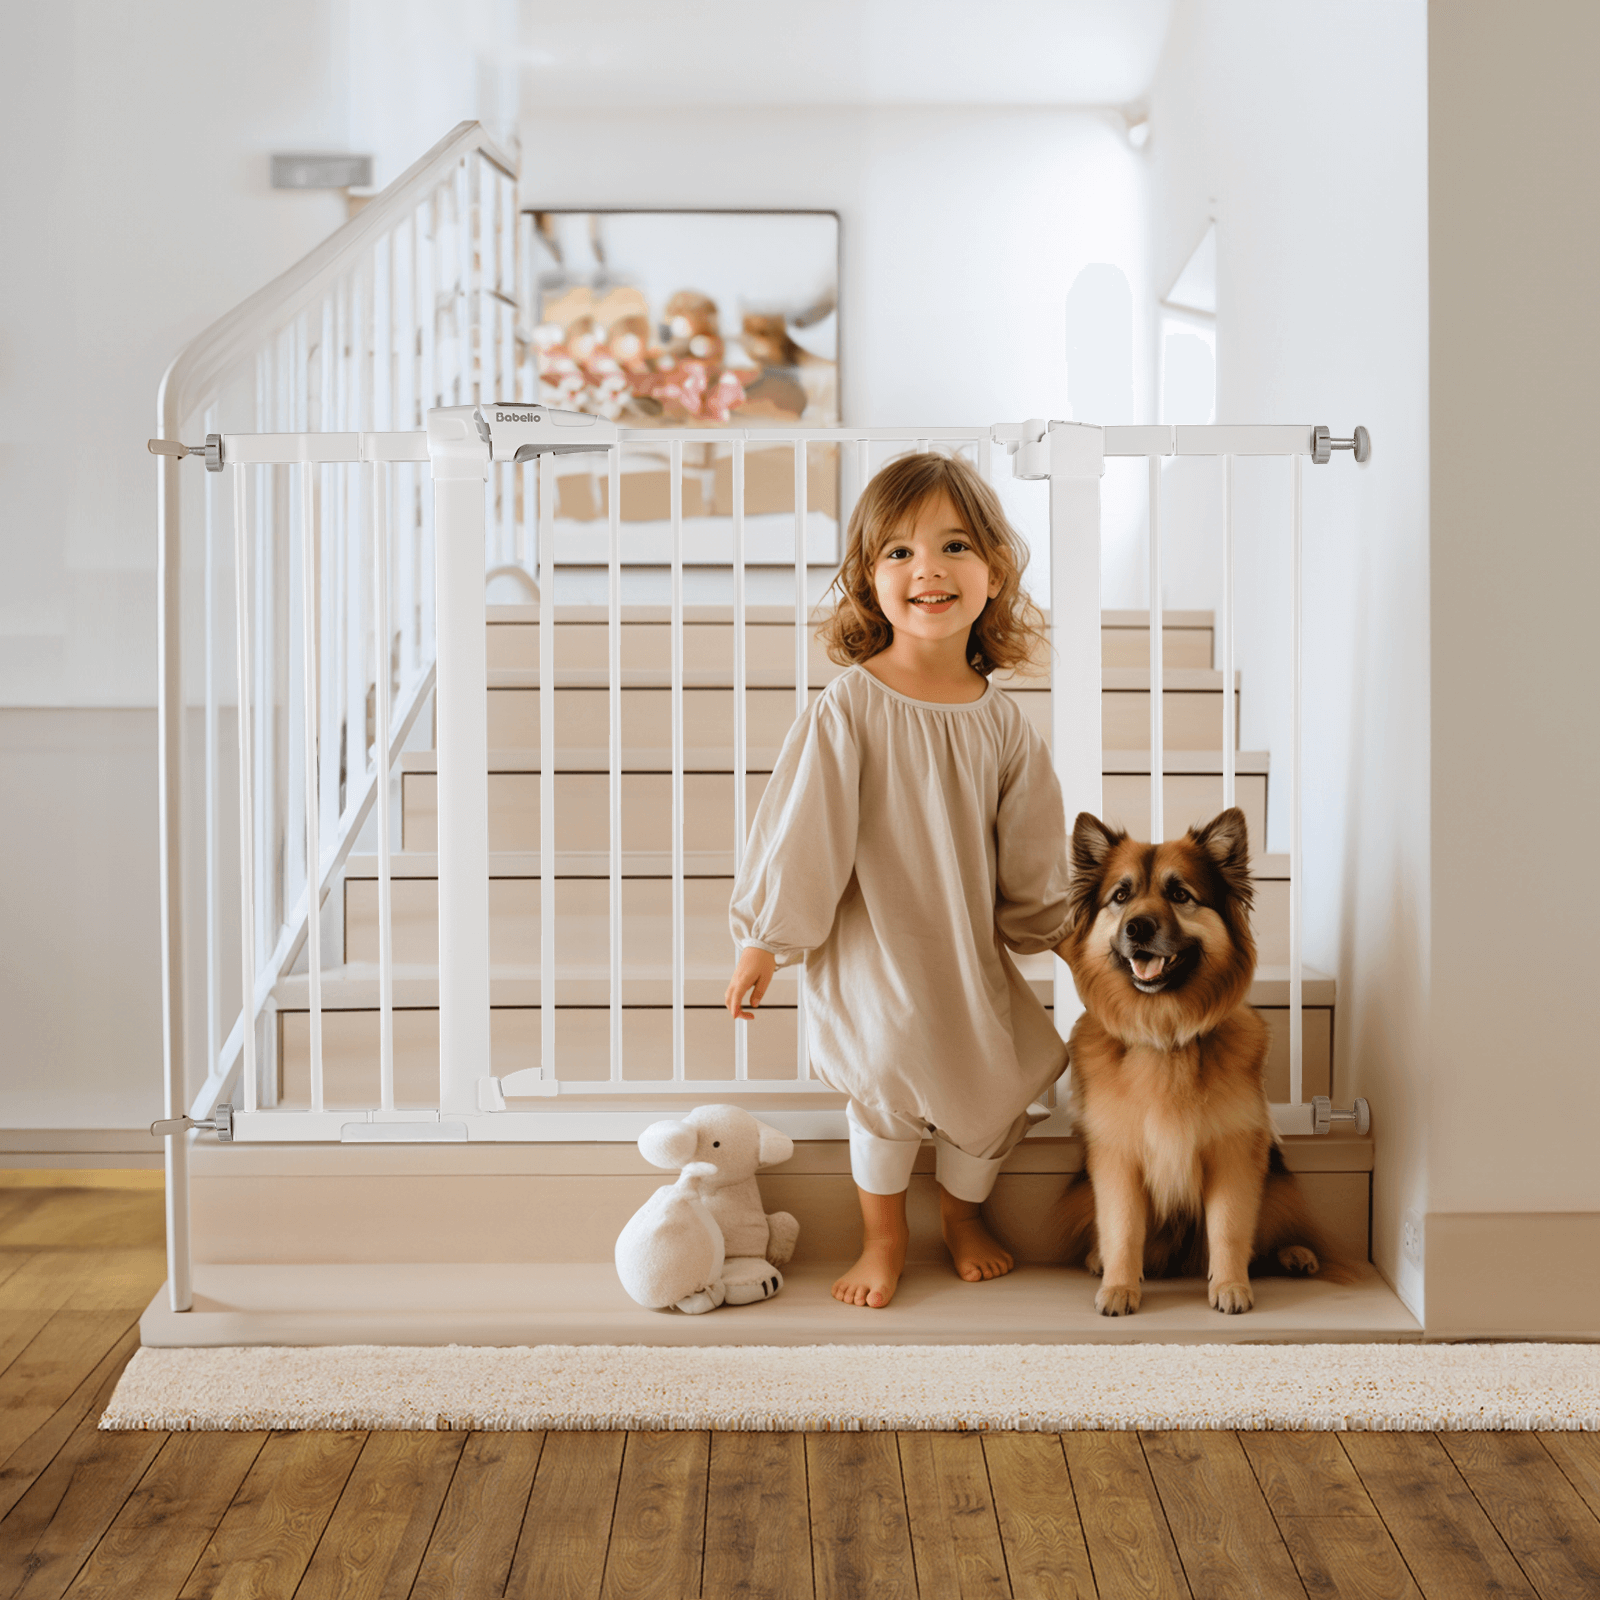 Babelio Auto-Close Metal Baby Gate with Double Lock - Easy Install 29-48'' Wide Pressure Mounted Child & Pet Safety Gate for Doorways & Stairs